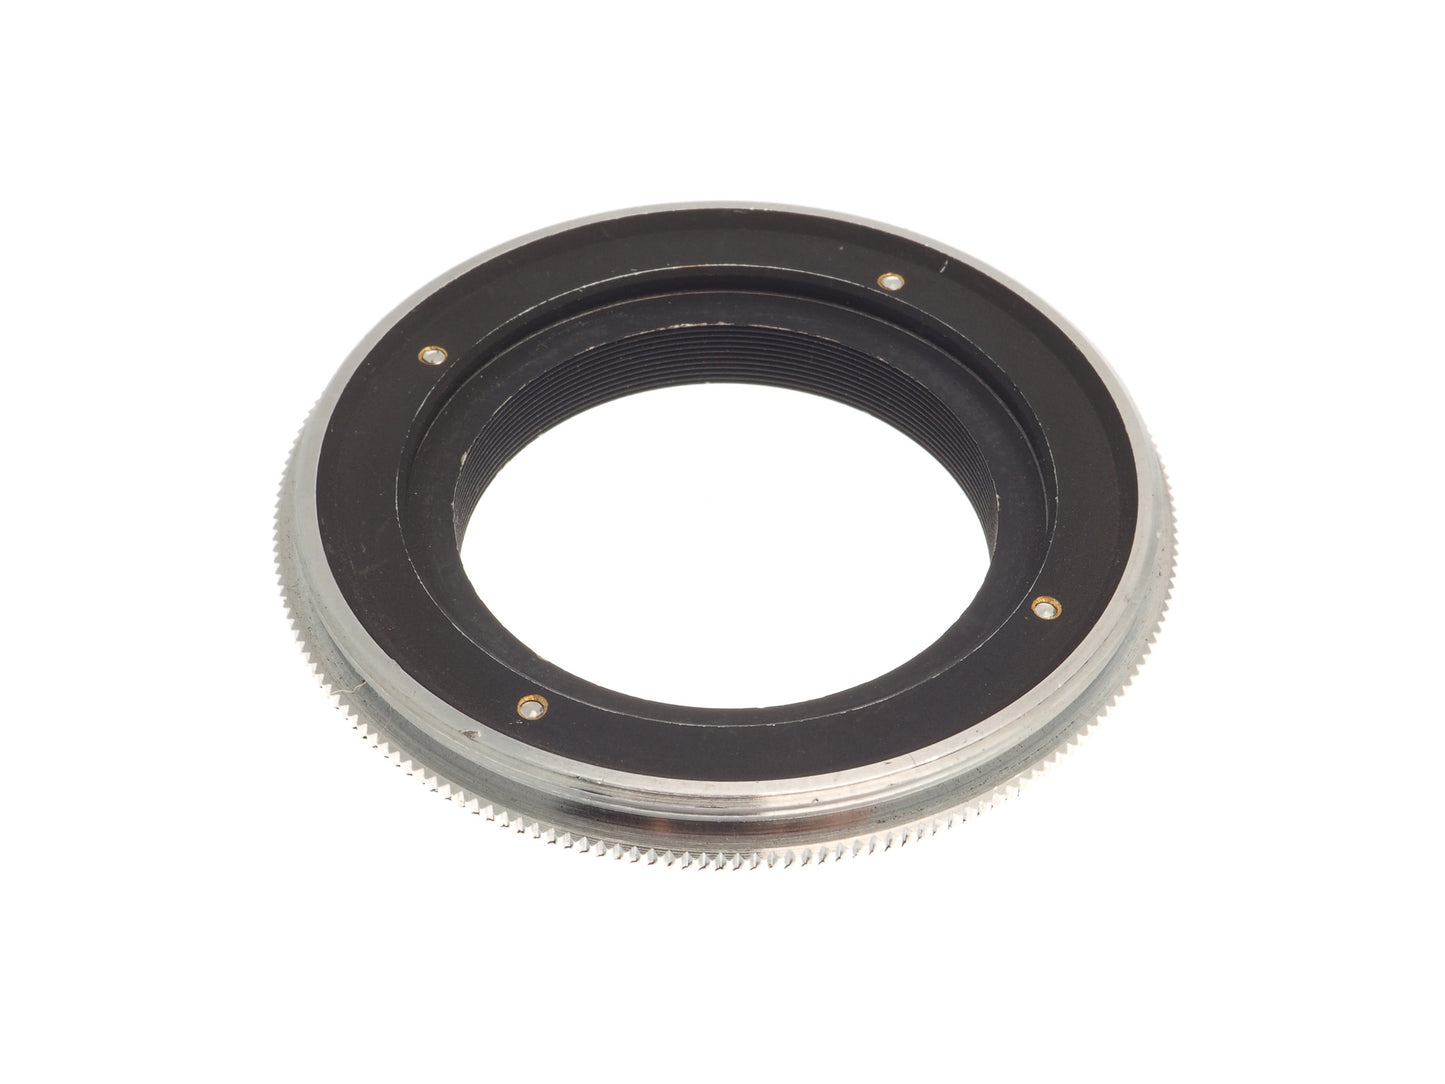 Generic 55mm Reverse Adapter for M39 - Lens Adapter